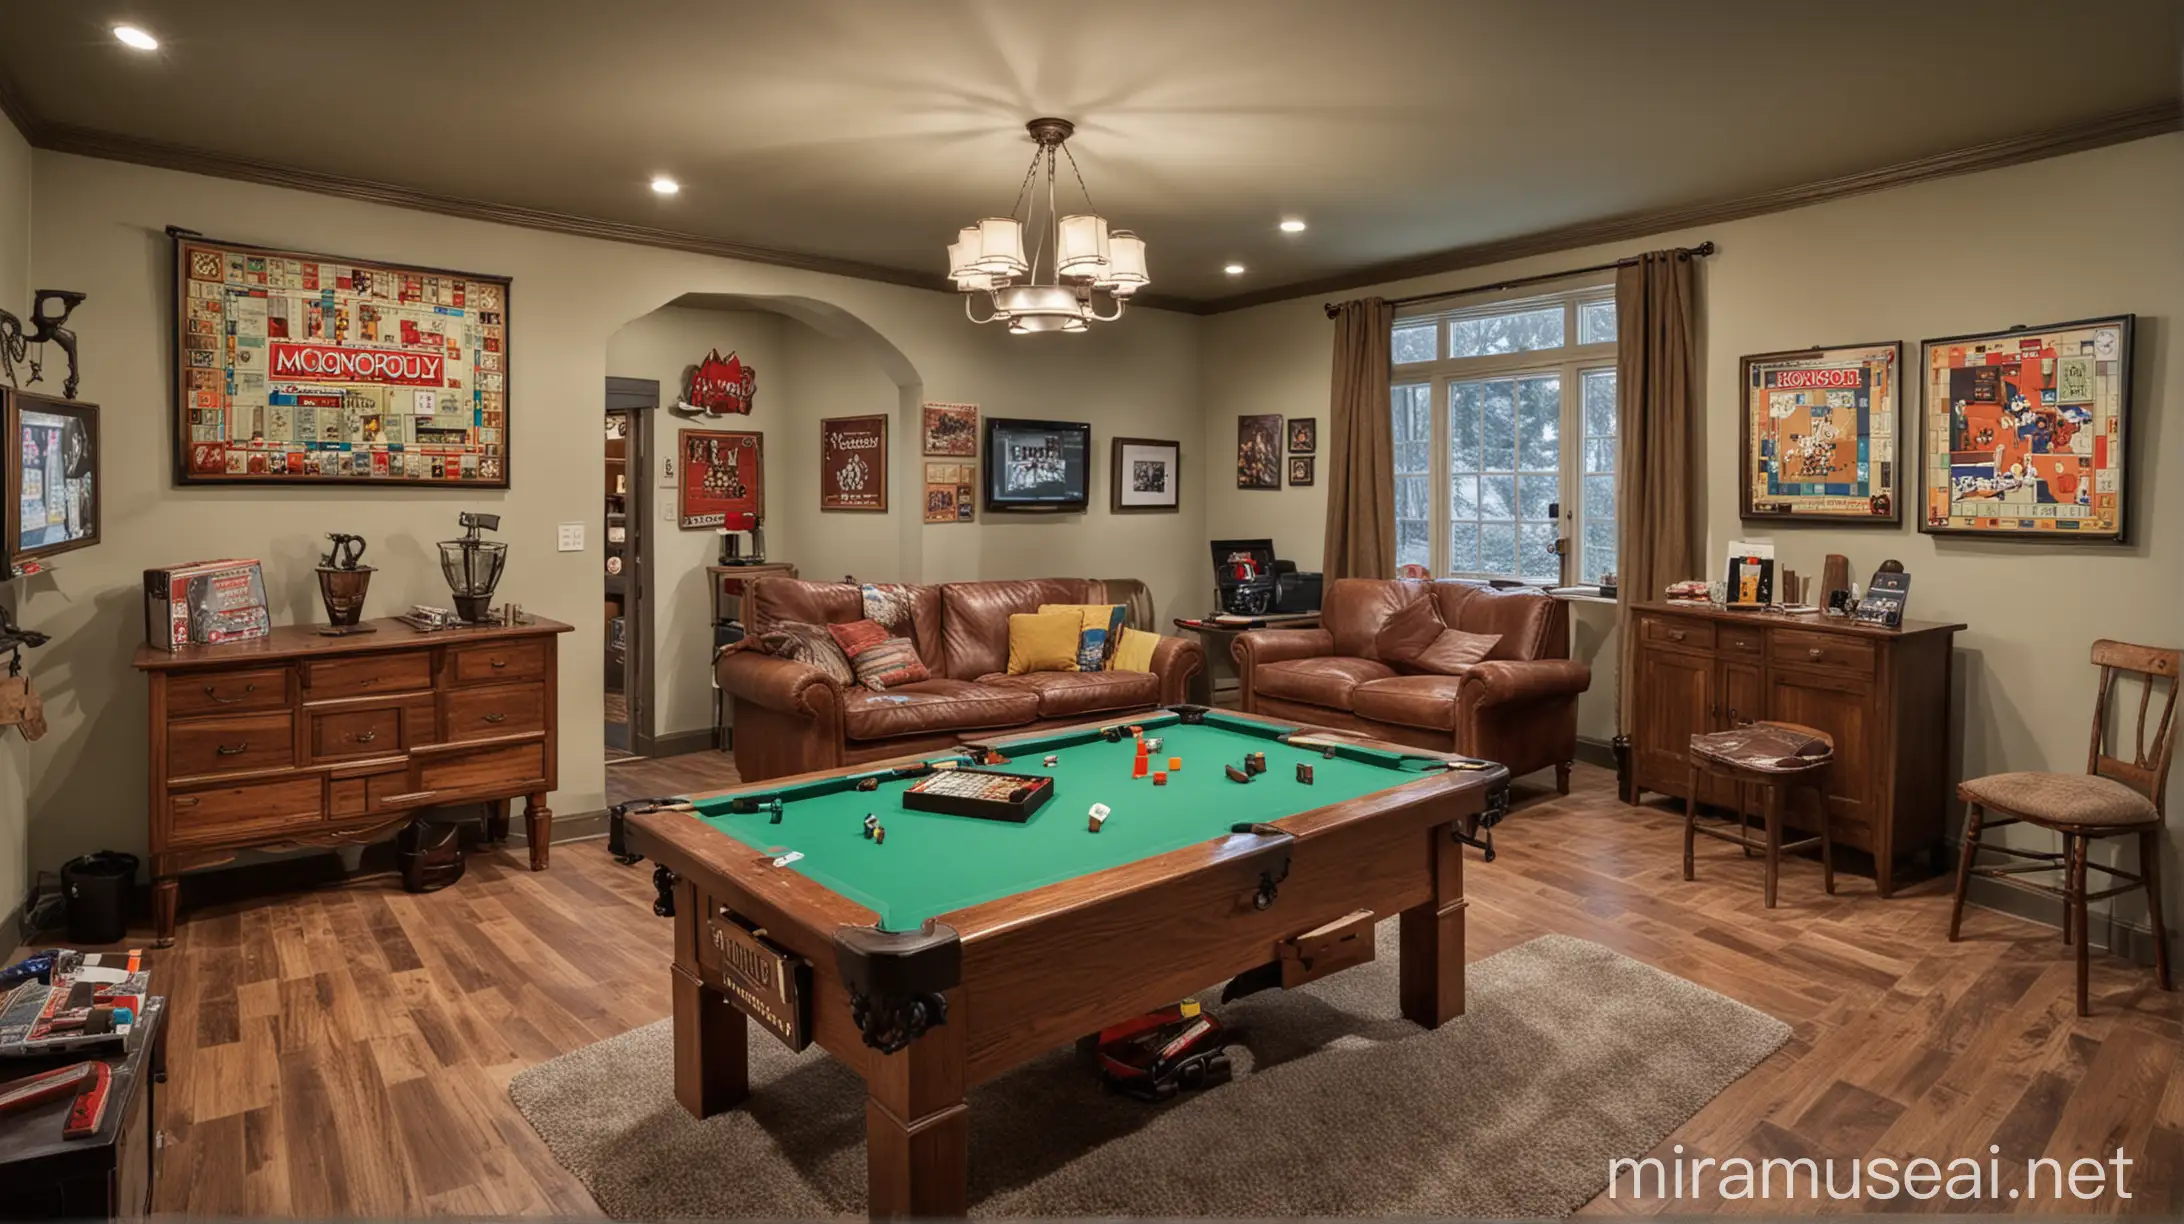 Cozy Family Game Room with Video Games and Board Games